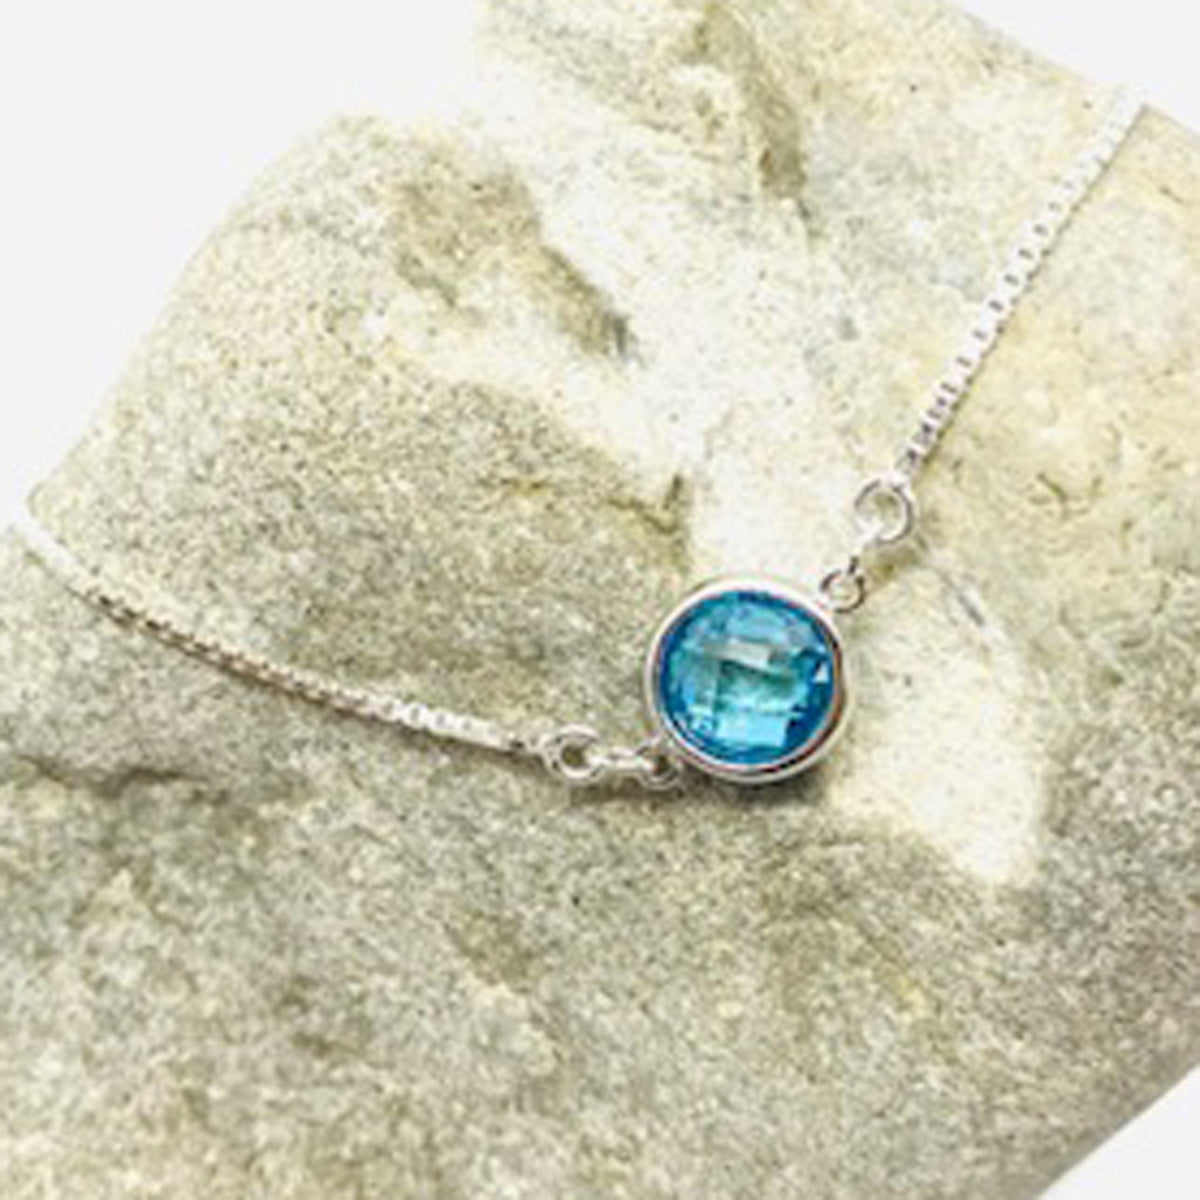 Handmade by Agenti by Jane, an exhibitor at the Rural Magpie Jewellery Fair